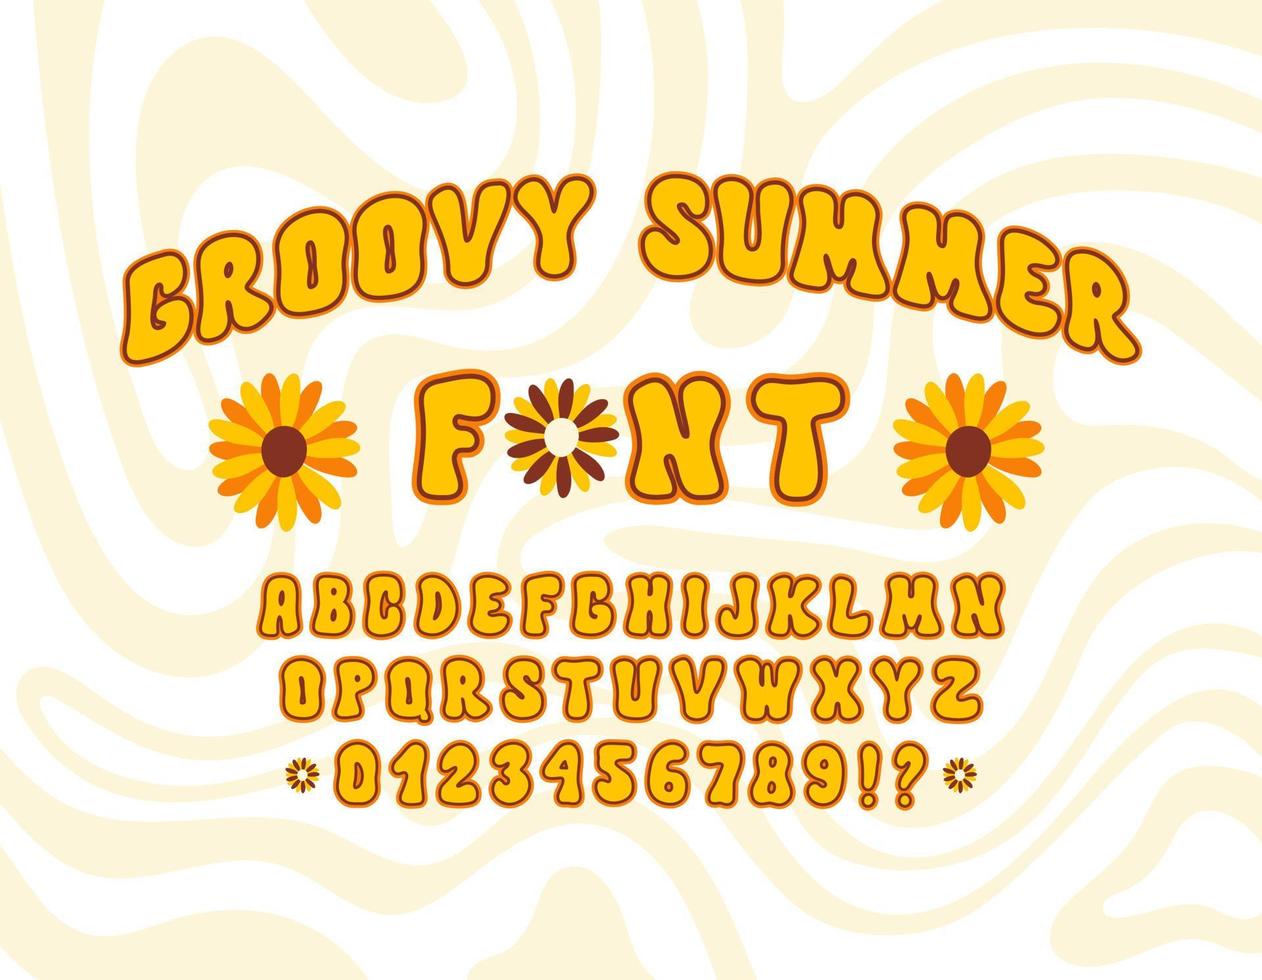 Groovy cartoon font in style retro 60s, 70s. Trendy psychedelic alphabet. Vector hand drawn illustration